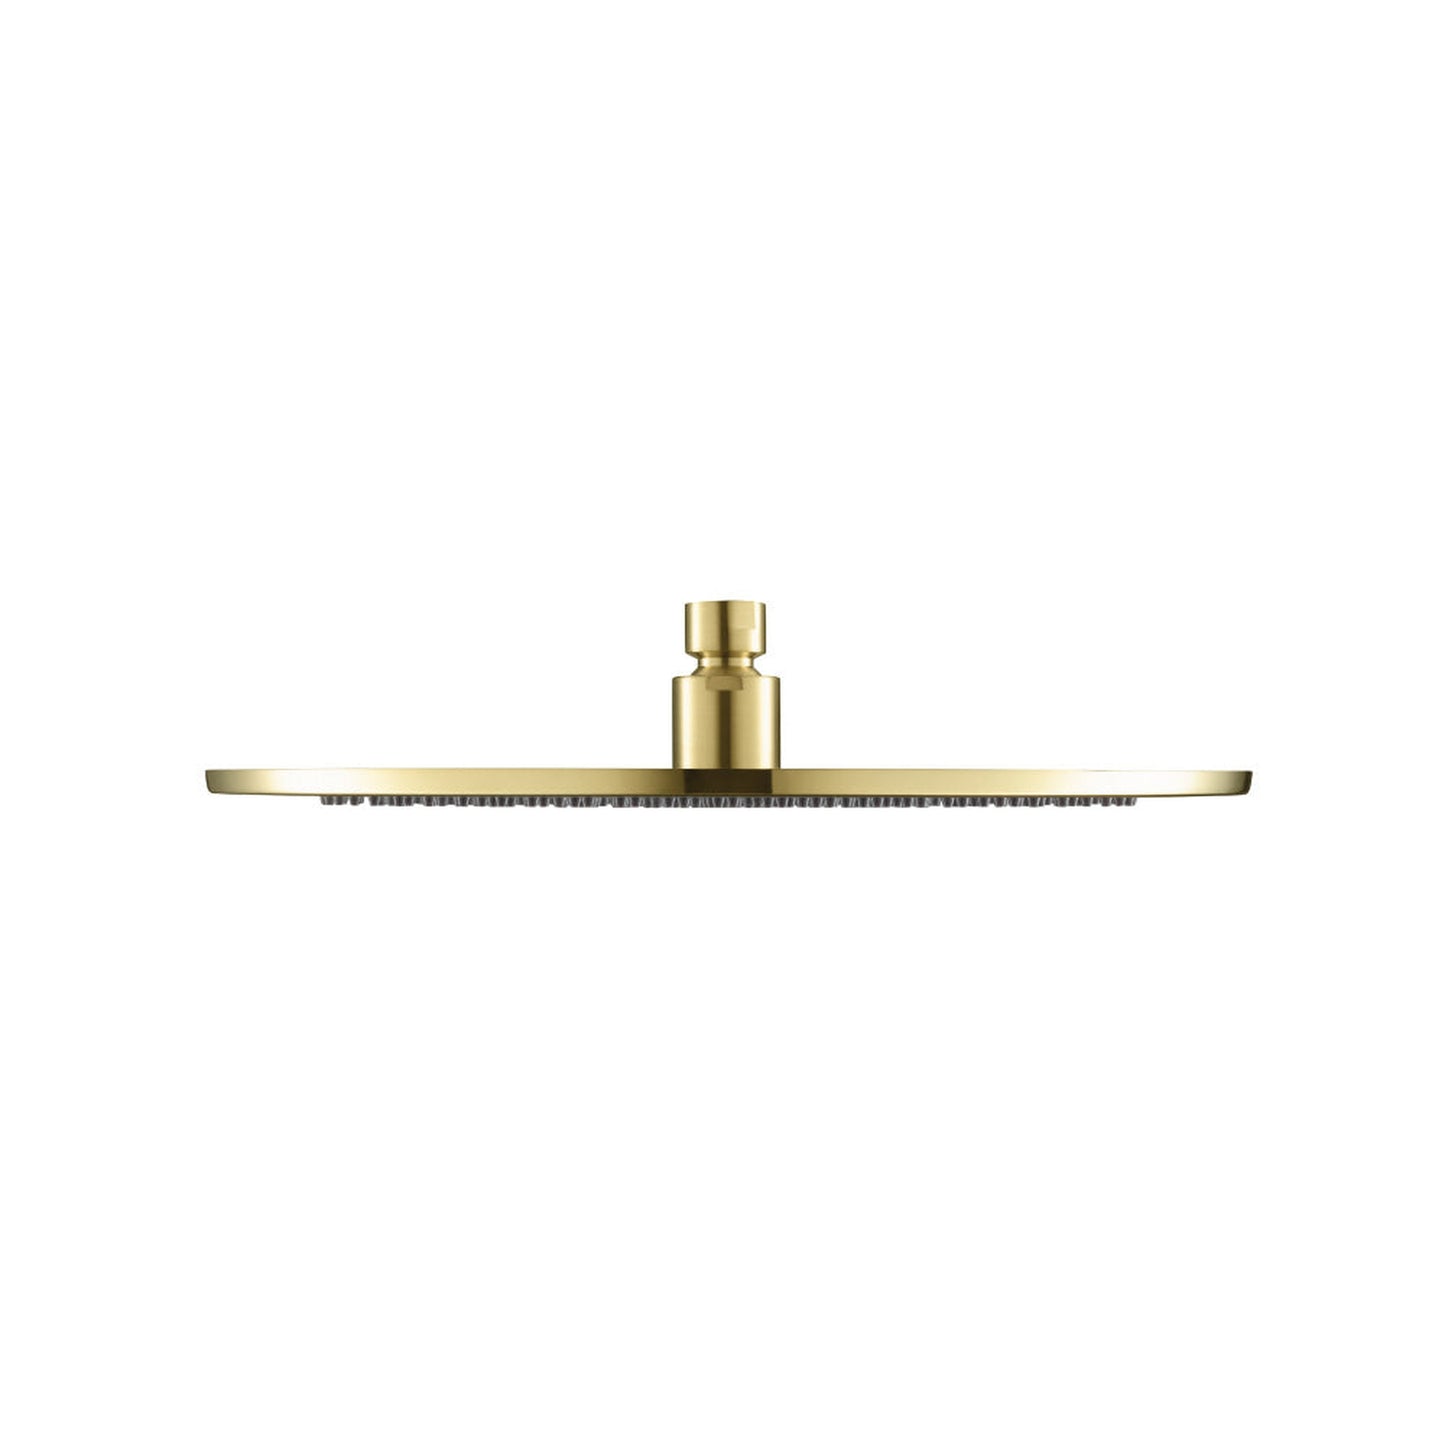 Isenberg Universal Fixtures 12" Single Function Round Satin Brass PVD Solid Brass Rain Shower Head With 15" Wall Mounted Shower Arm